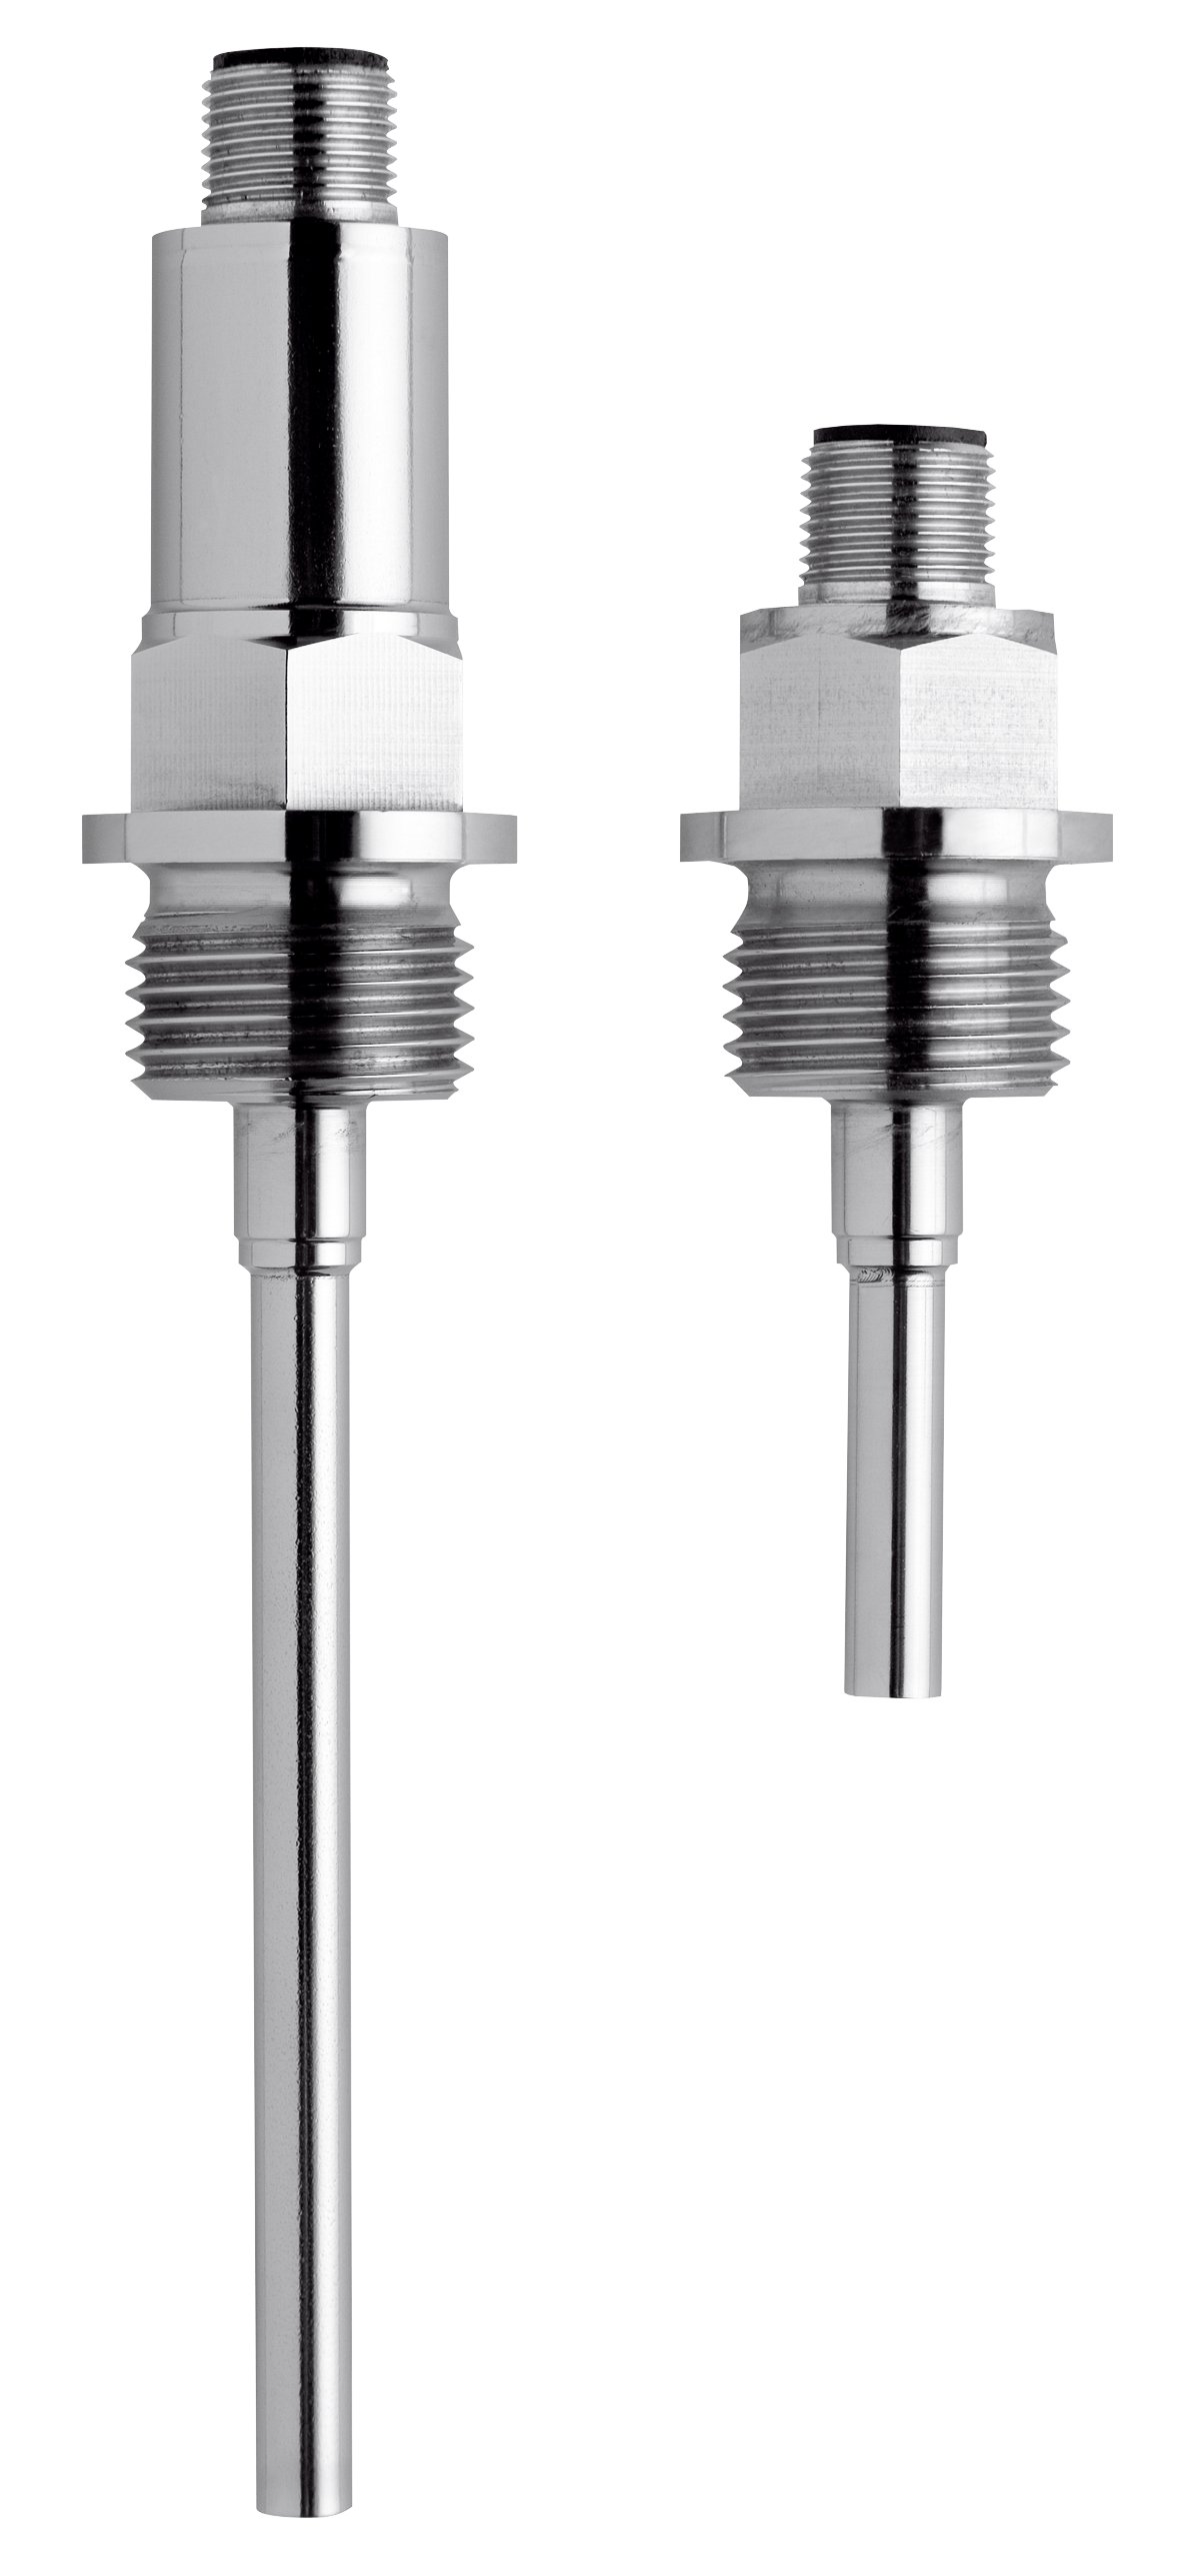 JUMO screw-in RTD temperature probe with programmable transmitter, M12 x 1 machine plug connection